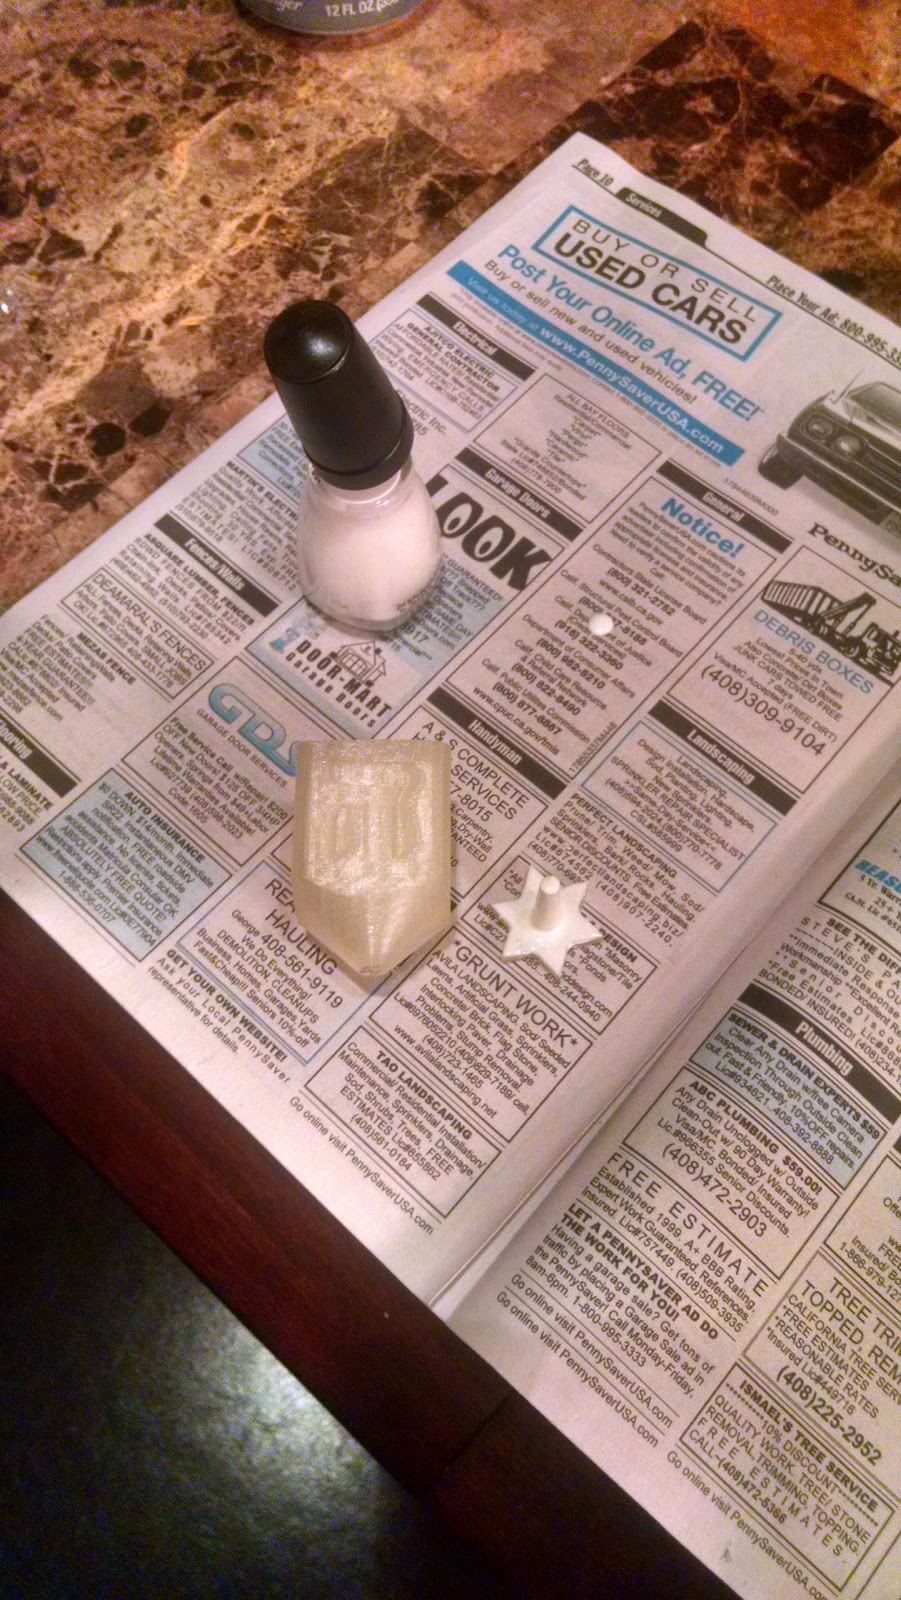 3D printed dreidel body and separate handle lying on newsprint. The handle is painted with white nail polish, the body is unpainted.